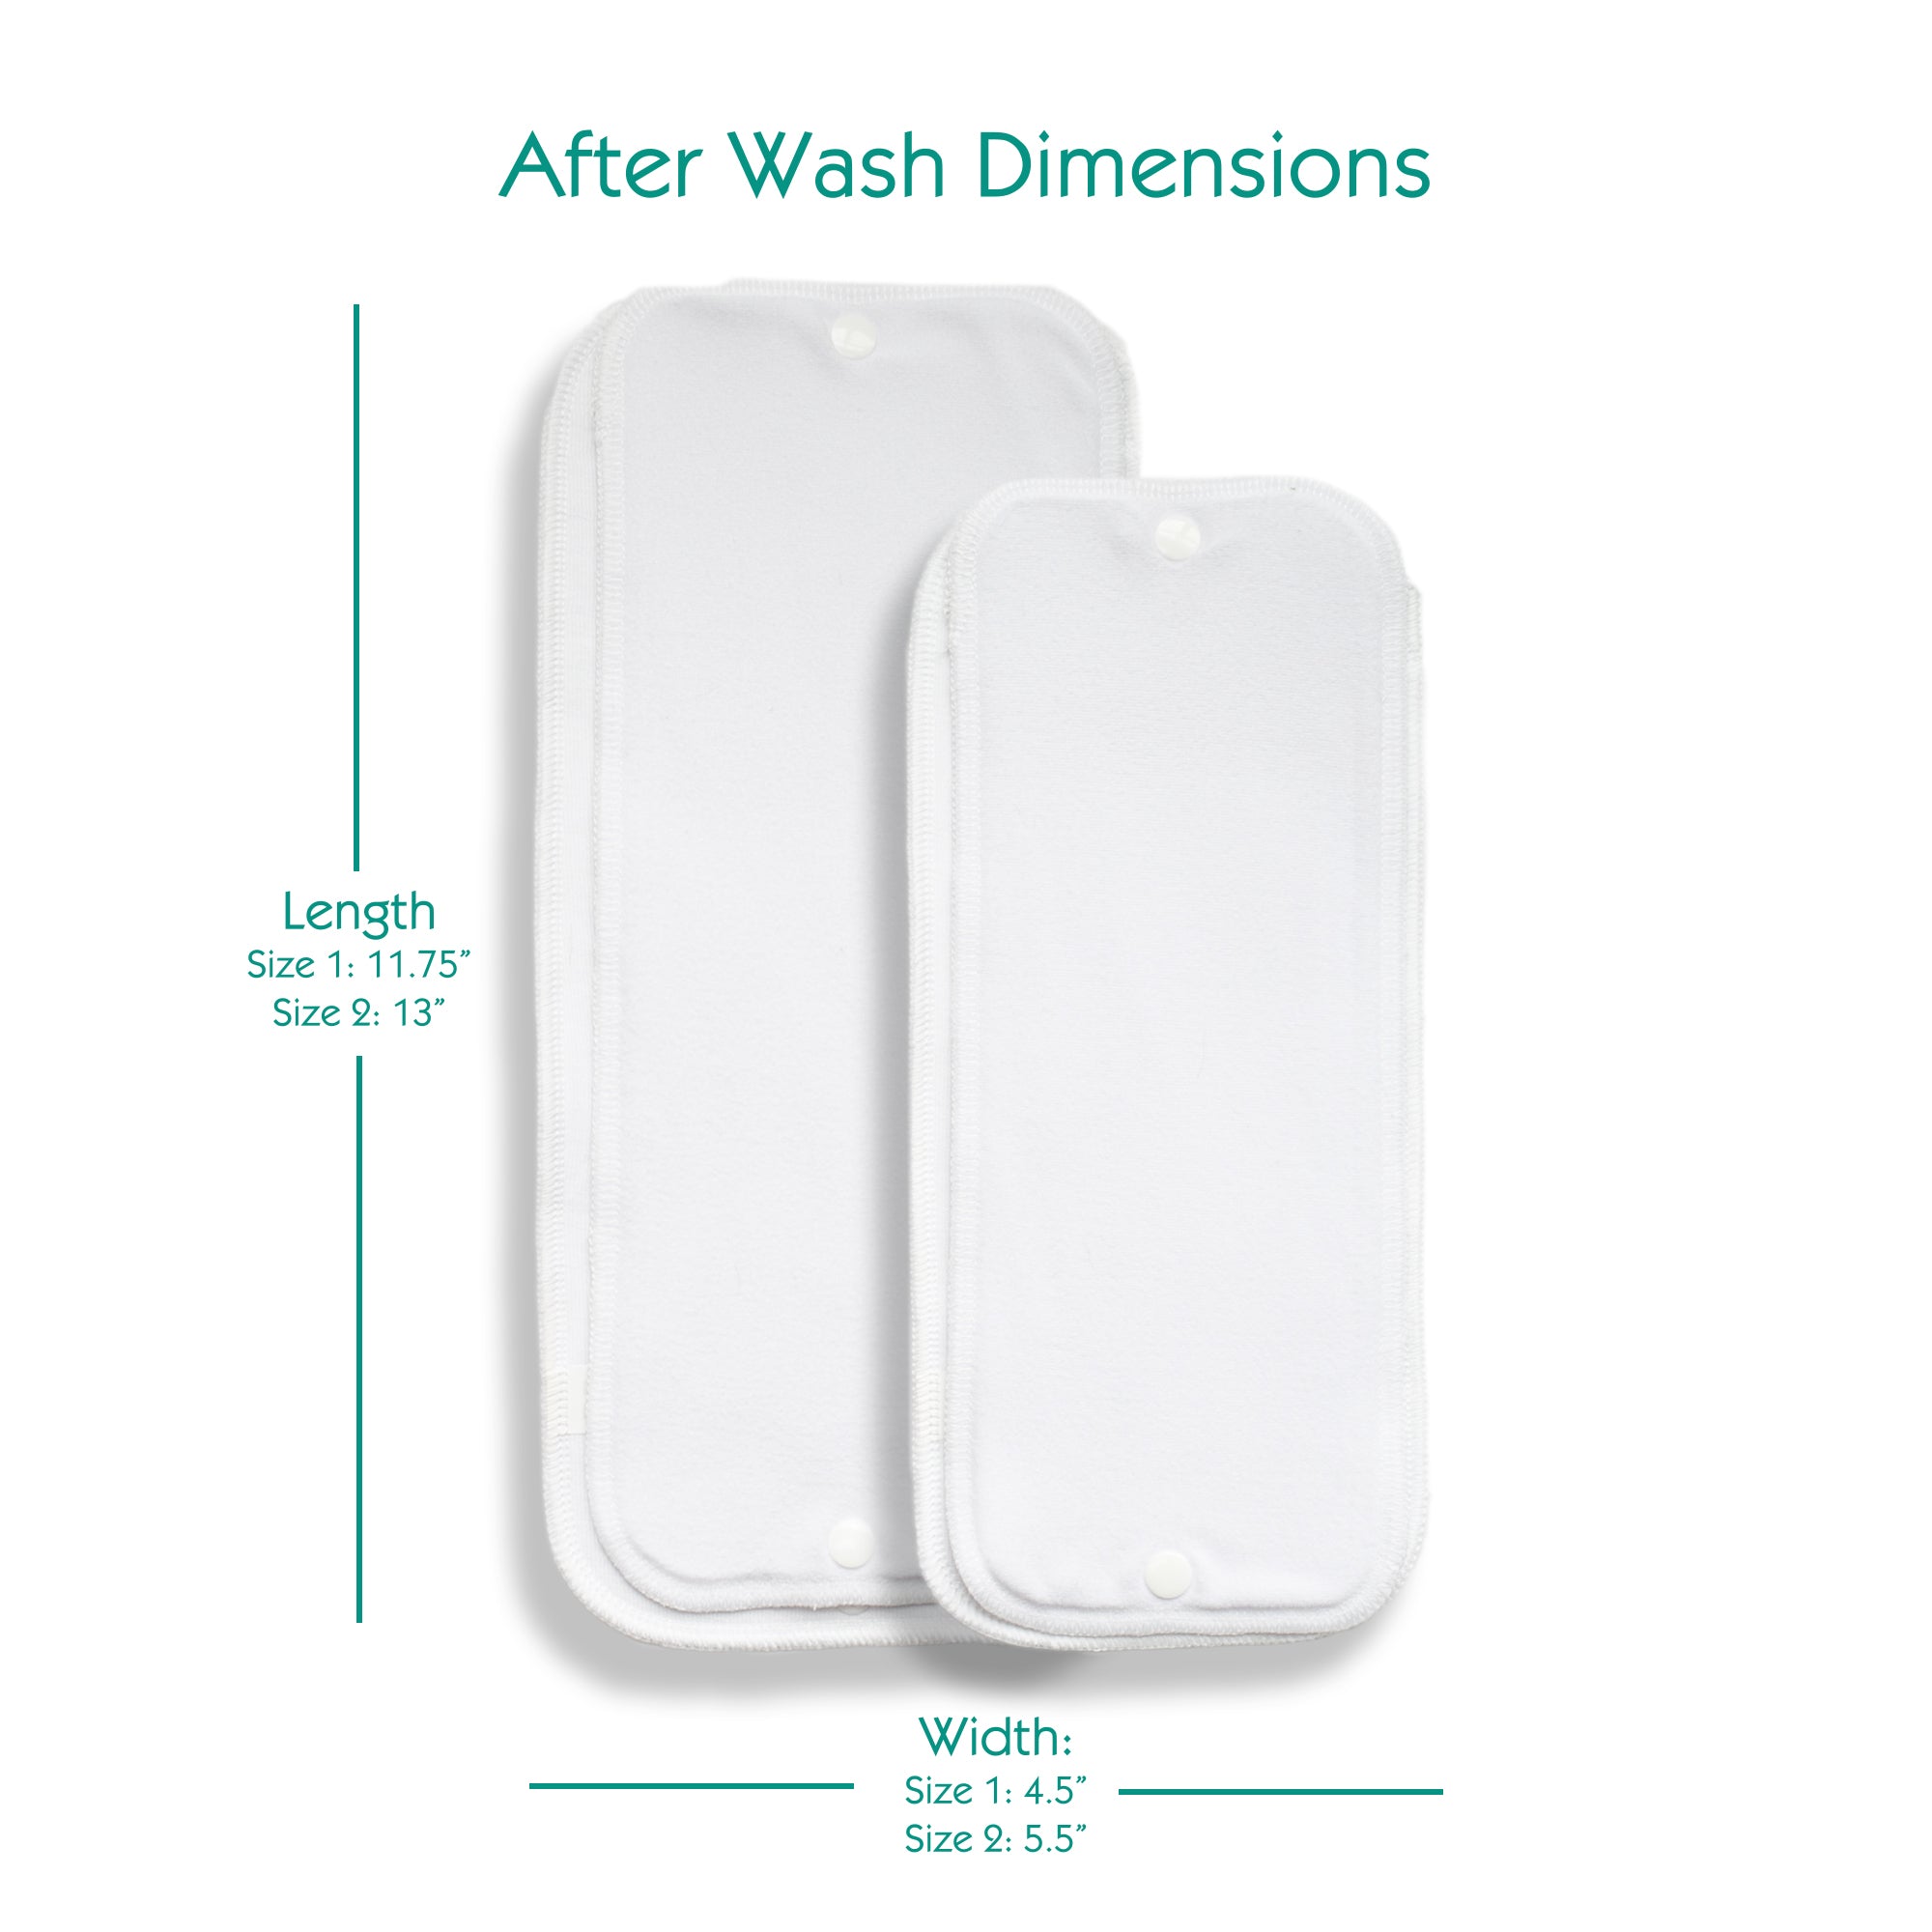 -Image of Thirsties Stay Dry Natural Duo Insert with after wash dimensions